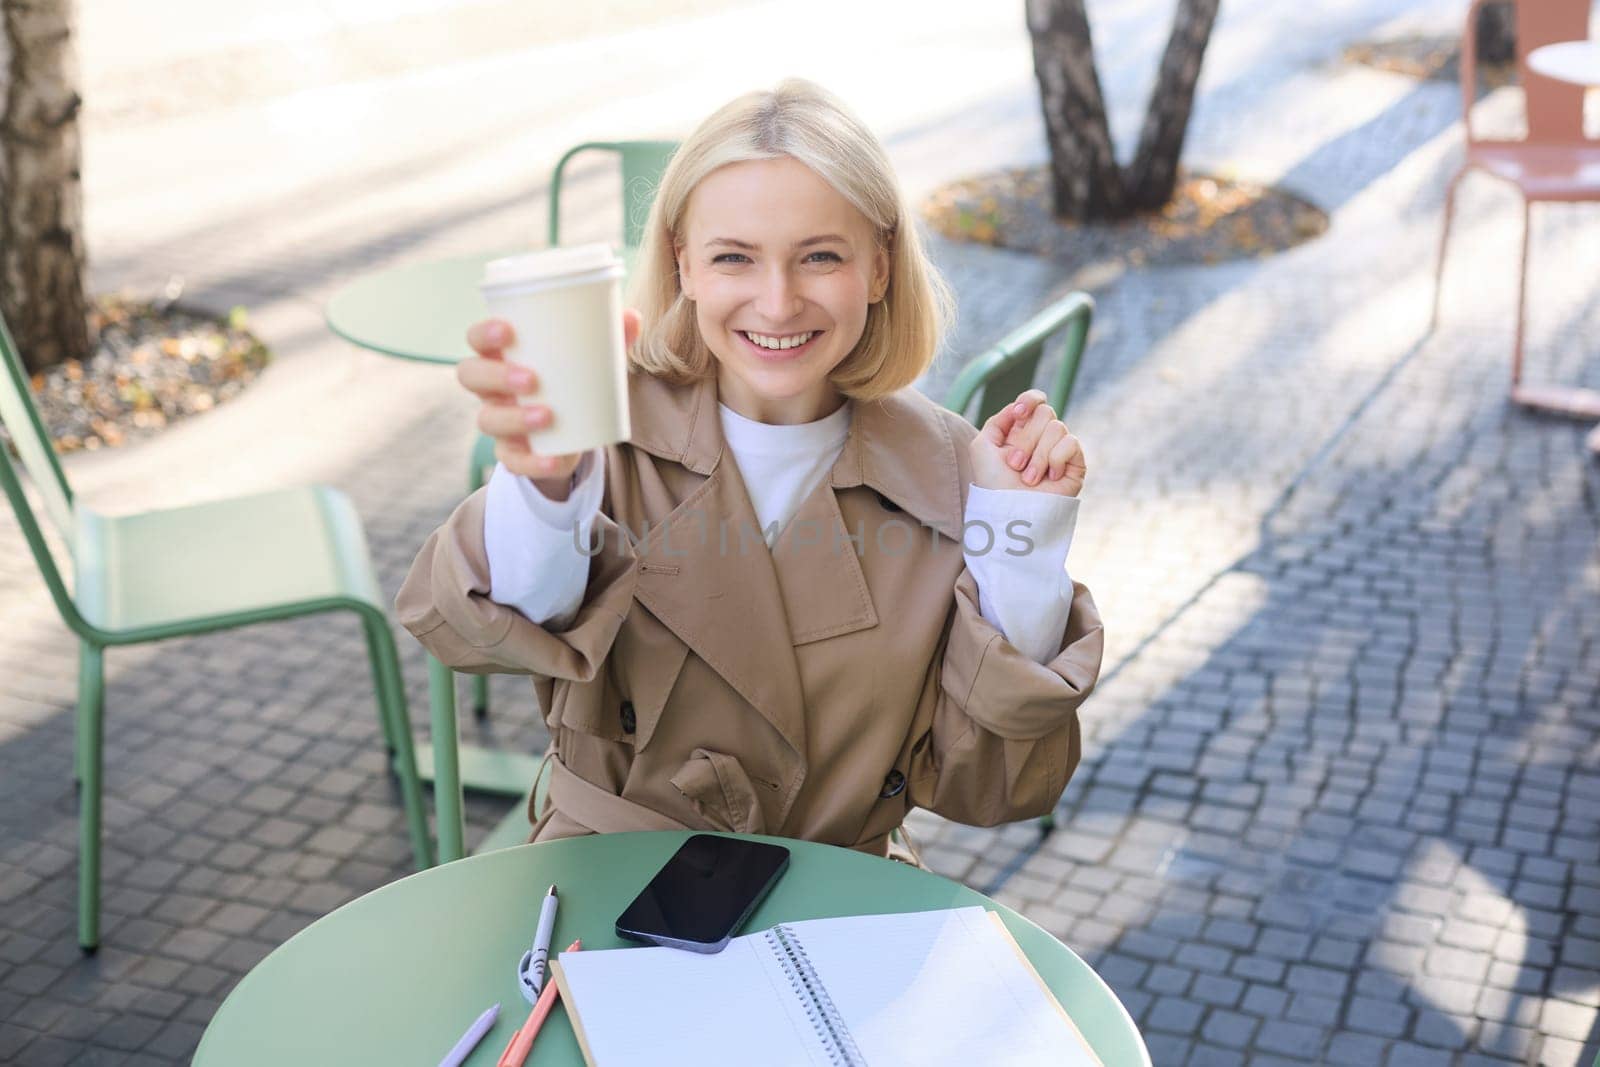 Beautiful blond woman, smiling, showing white takeaway coffee cup, drinking beverage in cafe shop, sitting outdoors.